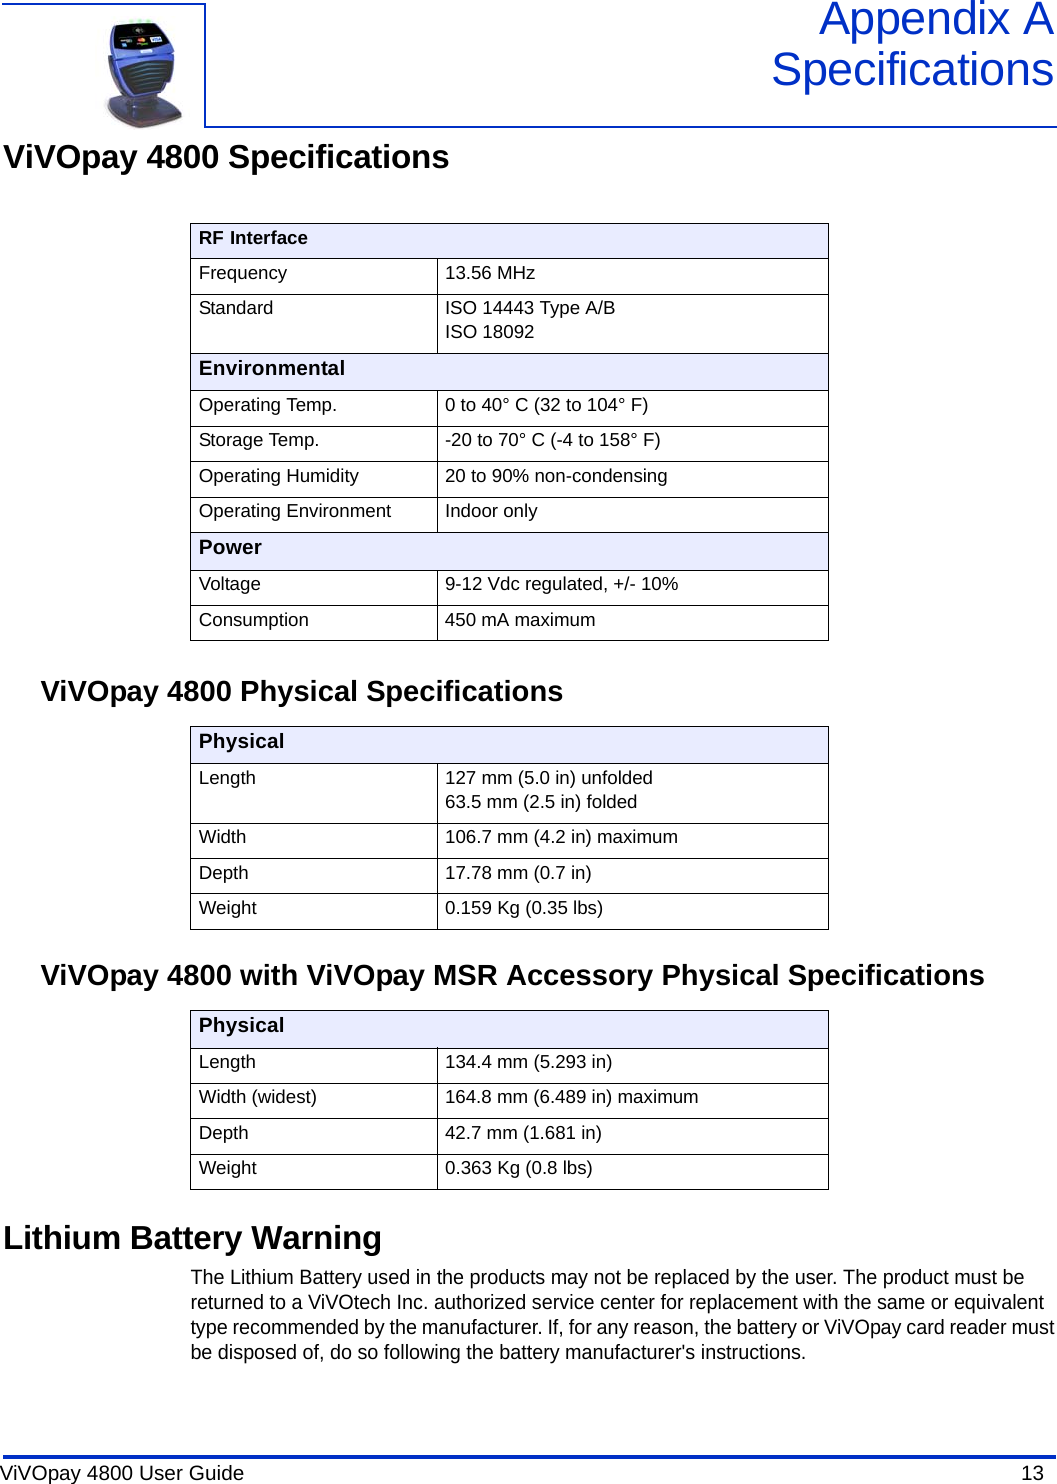 ViVOpay 4800 User Guide  13               Appendix ASpecificationsViVOpay 4800 SpecificationsViVOpay 4800 Physical SpecificationsViVOpay 4800 with ViVOpay MSR Accessory Physical SpecificationsLithium Battery WarningThe Lithium Battery used in the products may not be replaced by the user. The product must be returned to a ViVOtech Inc. authorized service center for replacement with the same or equivalent type recommended by the manufacturer. If, for any reason, the battery or ViVOpay card reader must be disposed of, do so following the battery manufacturer&apos;s instructions.RF InterfaceFrequency 13.56 MHzStandard ISO 14443 Type A/BISO 18092EnvironmentalOperating Temp. 0 to 40° C (32 to 104° F)Storage Temp. -20 to 70° C (-4 to 158° F)Operating Humidity 20 to 90% non-condensingOperating Environment Indoor onlyPowerVoltage 9-12 Vdc regulated, +/- 10%Consumption 450 mA maximumPhysicalLength 127 mm (5.0 in) unfolded63.5 mm (2.5 in) foldedWidth 106.7 mm (4.2 in) maximumDepth 17.78 mm (0.7 in)Weight 0.159 Kg (0.35 lbs)PhysicalLength 134.4 mm (5.293 in)Width (widest) 164.8 mm (6.489 in) maximumDepth 42.7 mm (1.681 in)Weight 0.363 Kg (0.8 lbs)